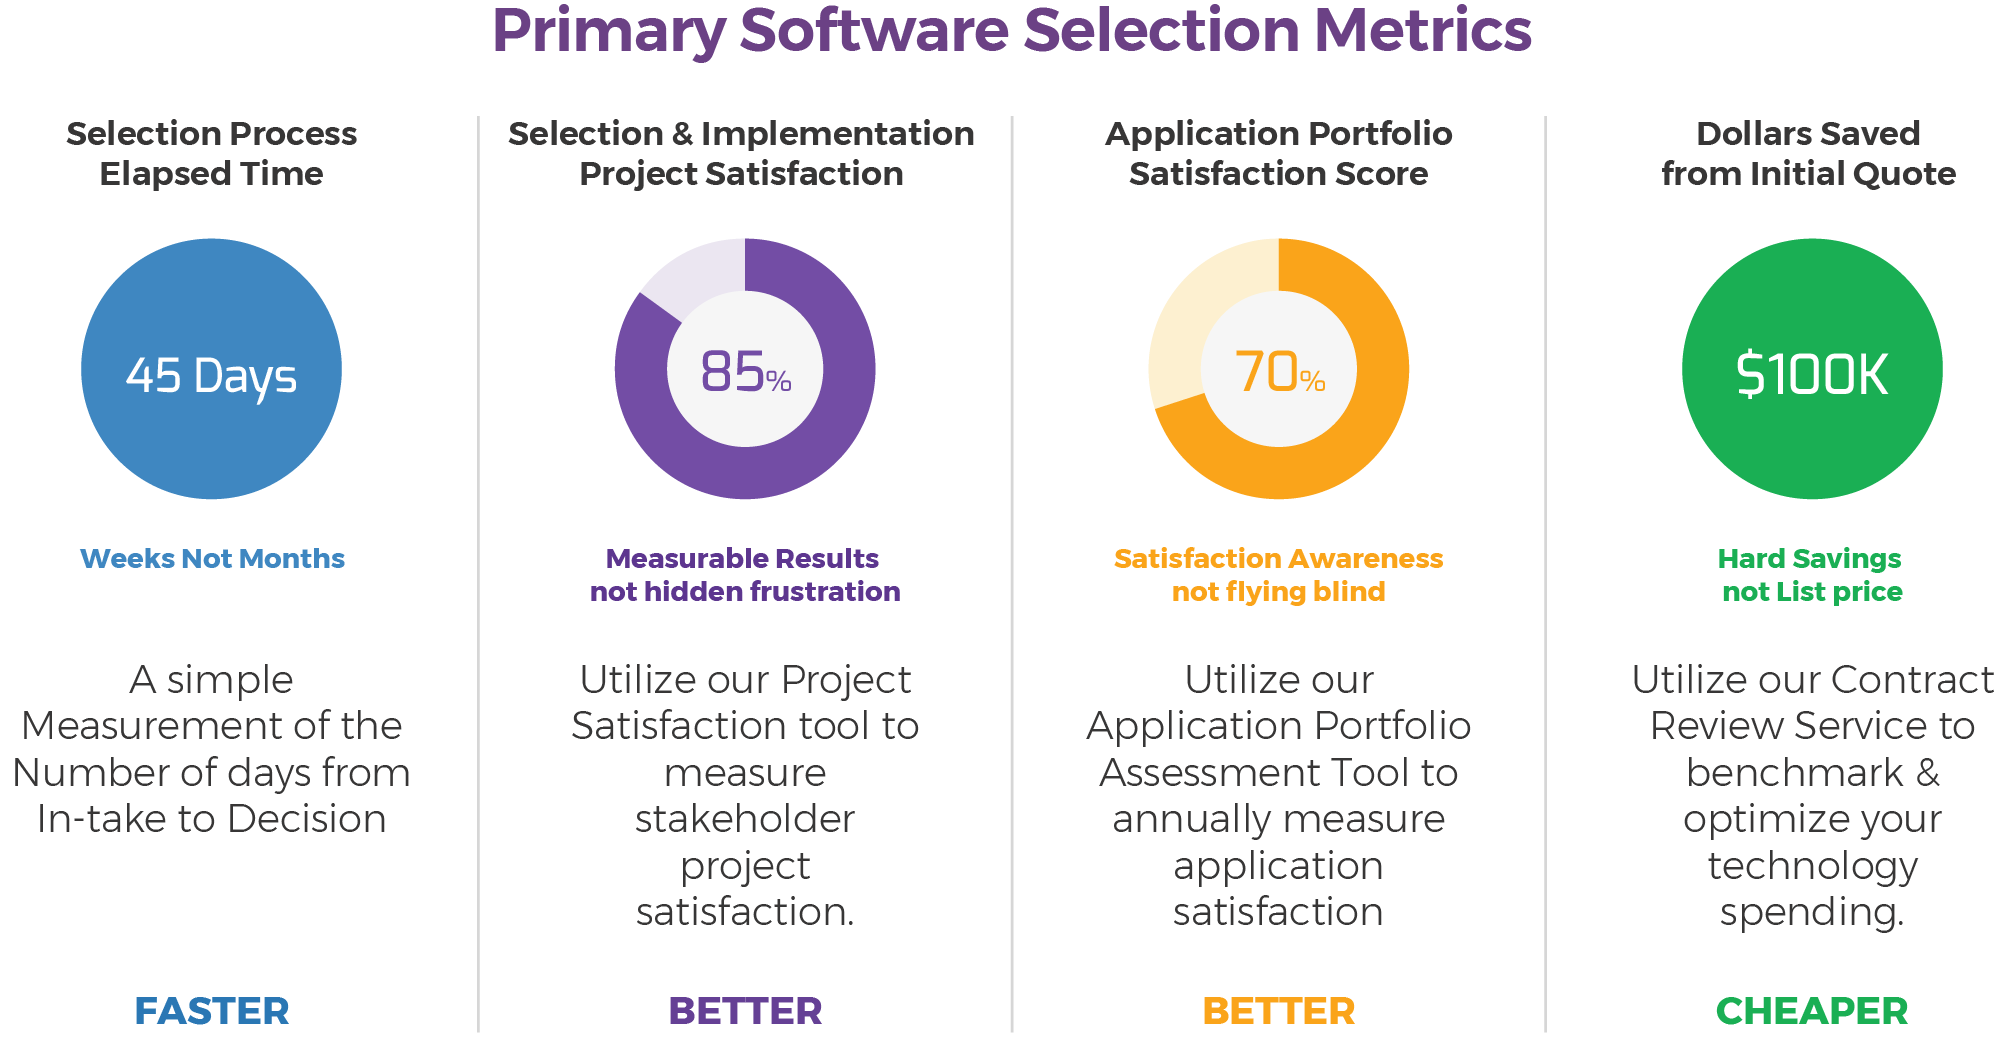 Primary Software Selection Metrics Chart